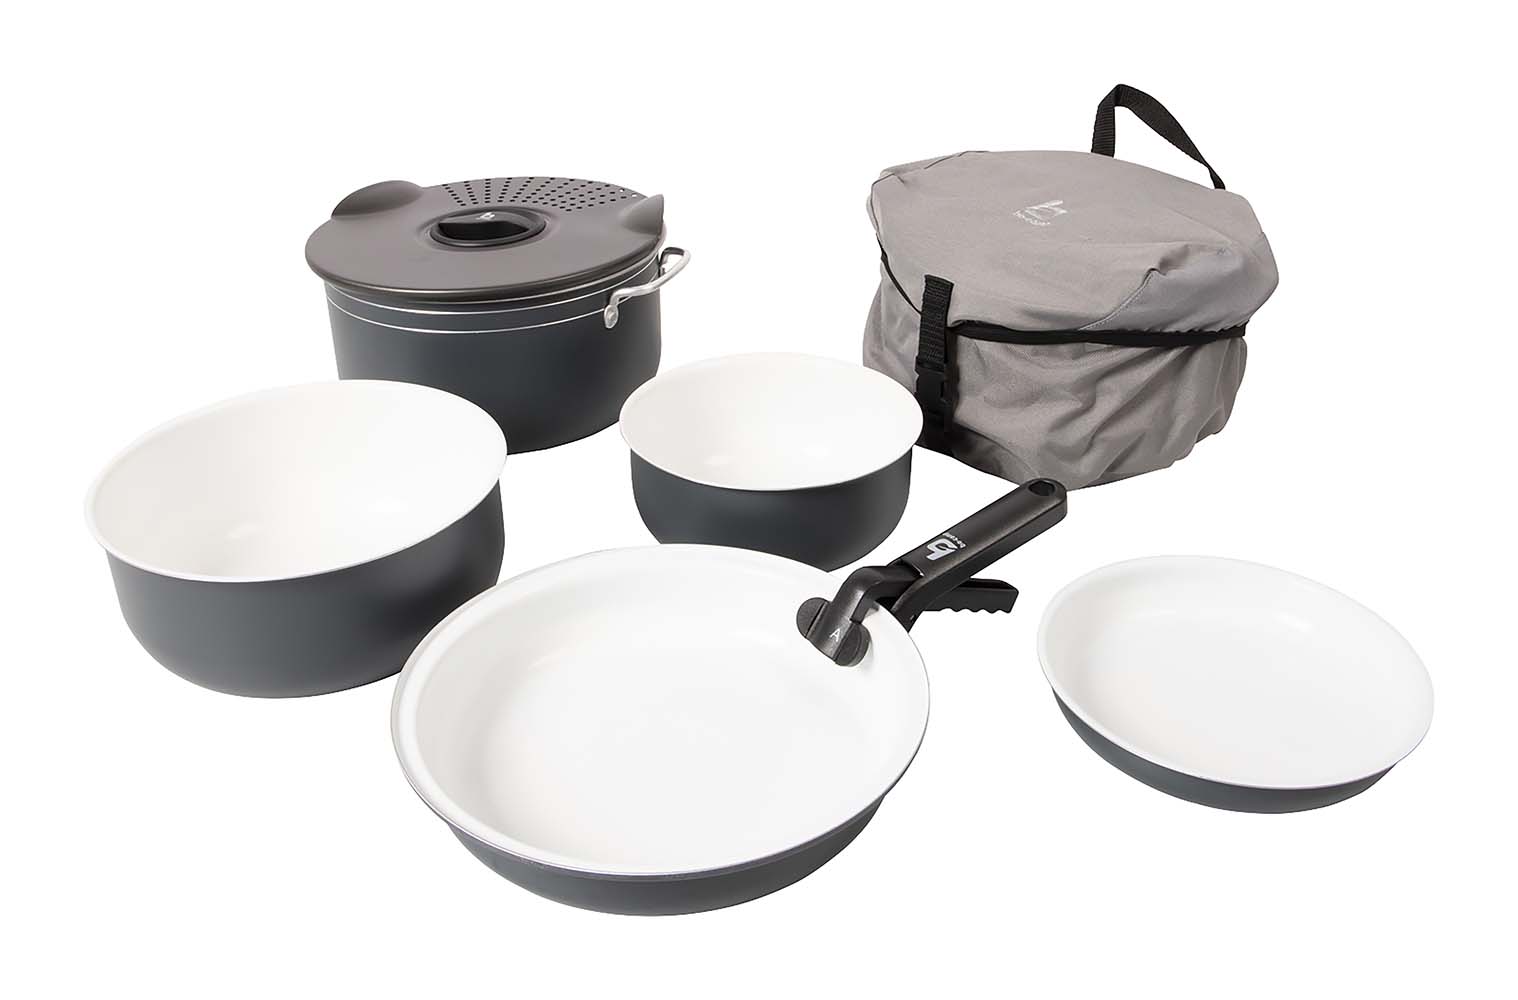 2300392 A complete and very compact 7-piece cookware set. All pans from this set have a powder coating on the outside and a durable ceramic coating on the inside. Due to the use of aluminium, this pan set weighs very little. These aluminium pans can be used on the following heat sources; gas, ceramic and electric. This pan set consists of 3 saucepans, 2 frying pans, a straining lid and a pan handle. The supplied protective cover ensures that the entire set can be compactly stored. Dimensions of saucepans (Øxh): 23x12, 21x8 and 17x7 cm. Dimensions of frying pans (Øxh): 24x4.5 and 18.5x3 cm. Dimensions nested (Øxh): 24x16 cm. Content: 1.4, 2.5 and 4.4 litres.